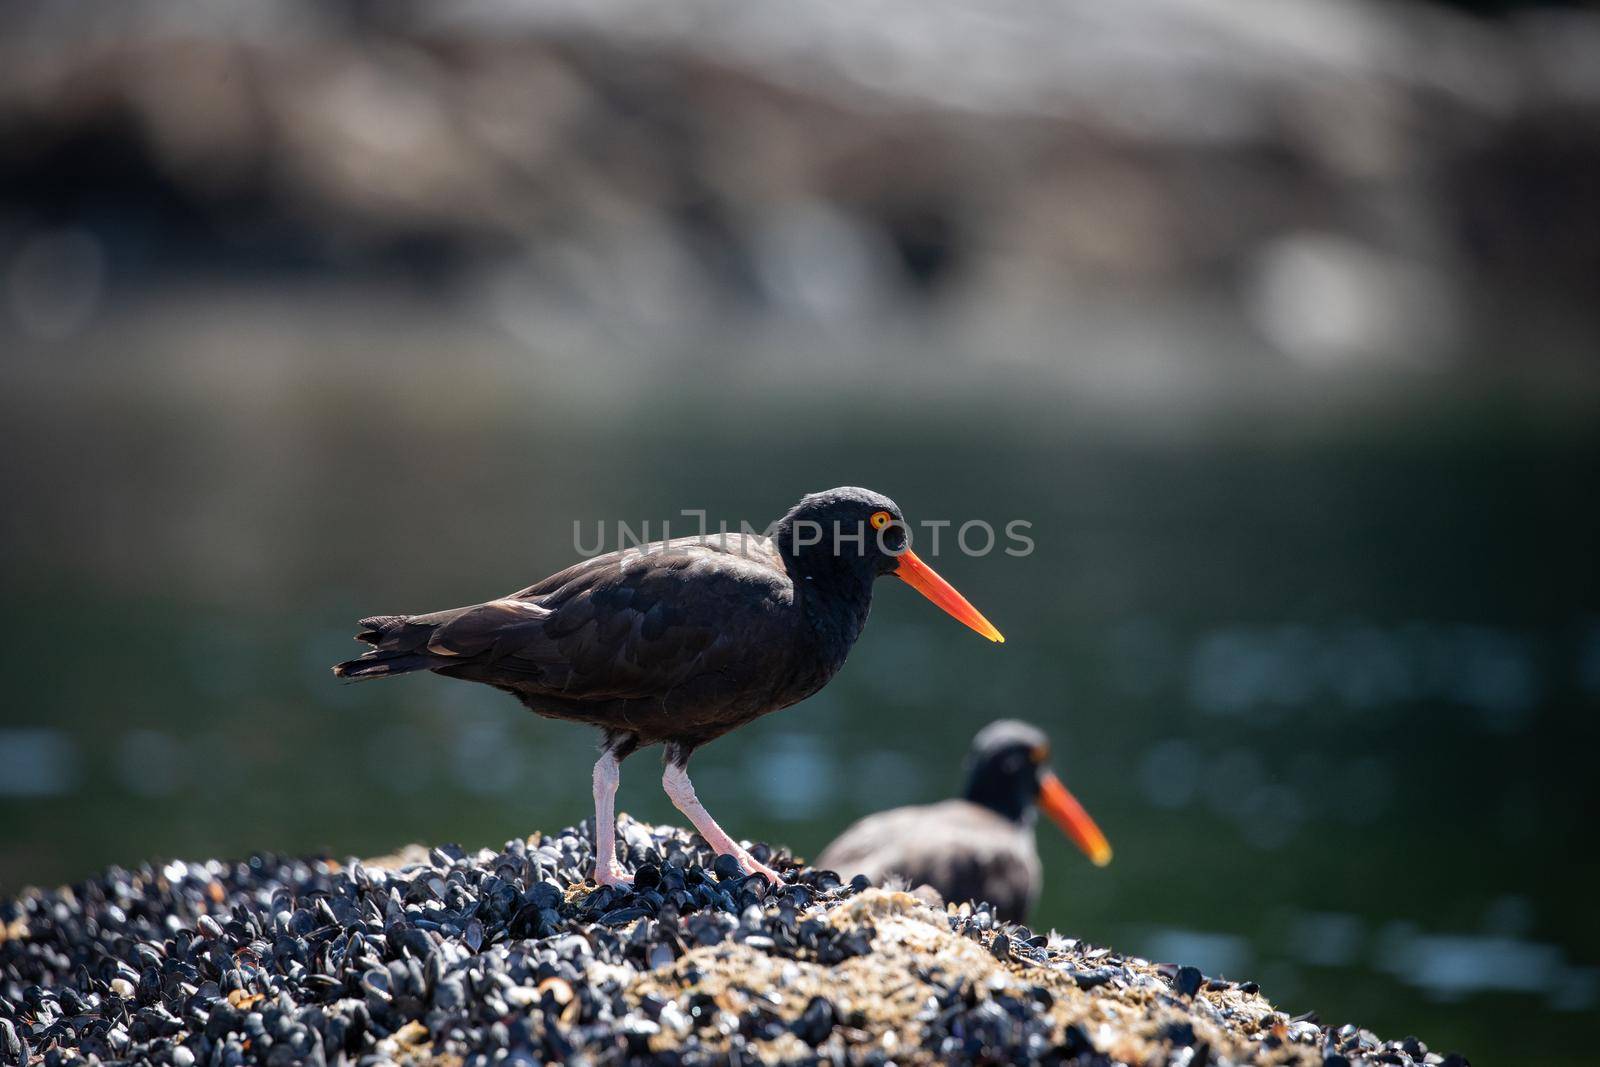 Black Oystercatcher on shells on a rock with another bird behind, near Ballet Bay, Sunshine Coast, British Columbia